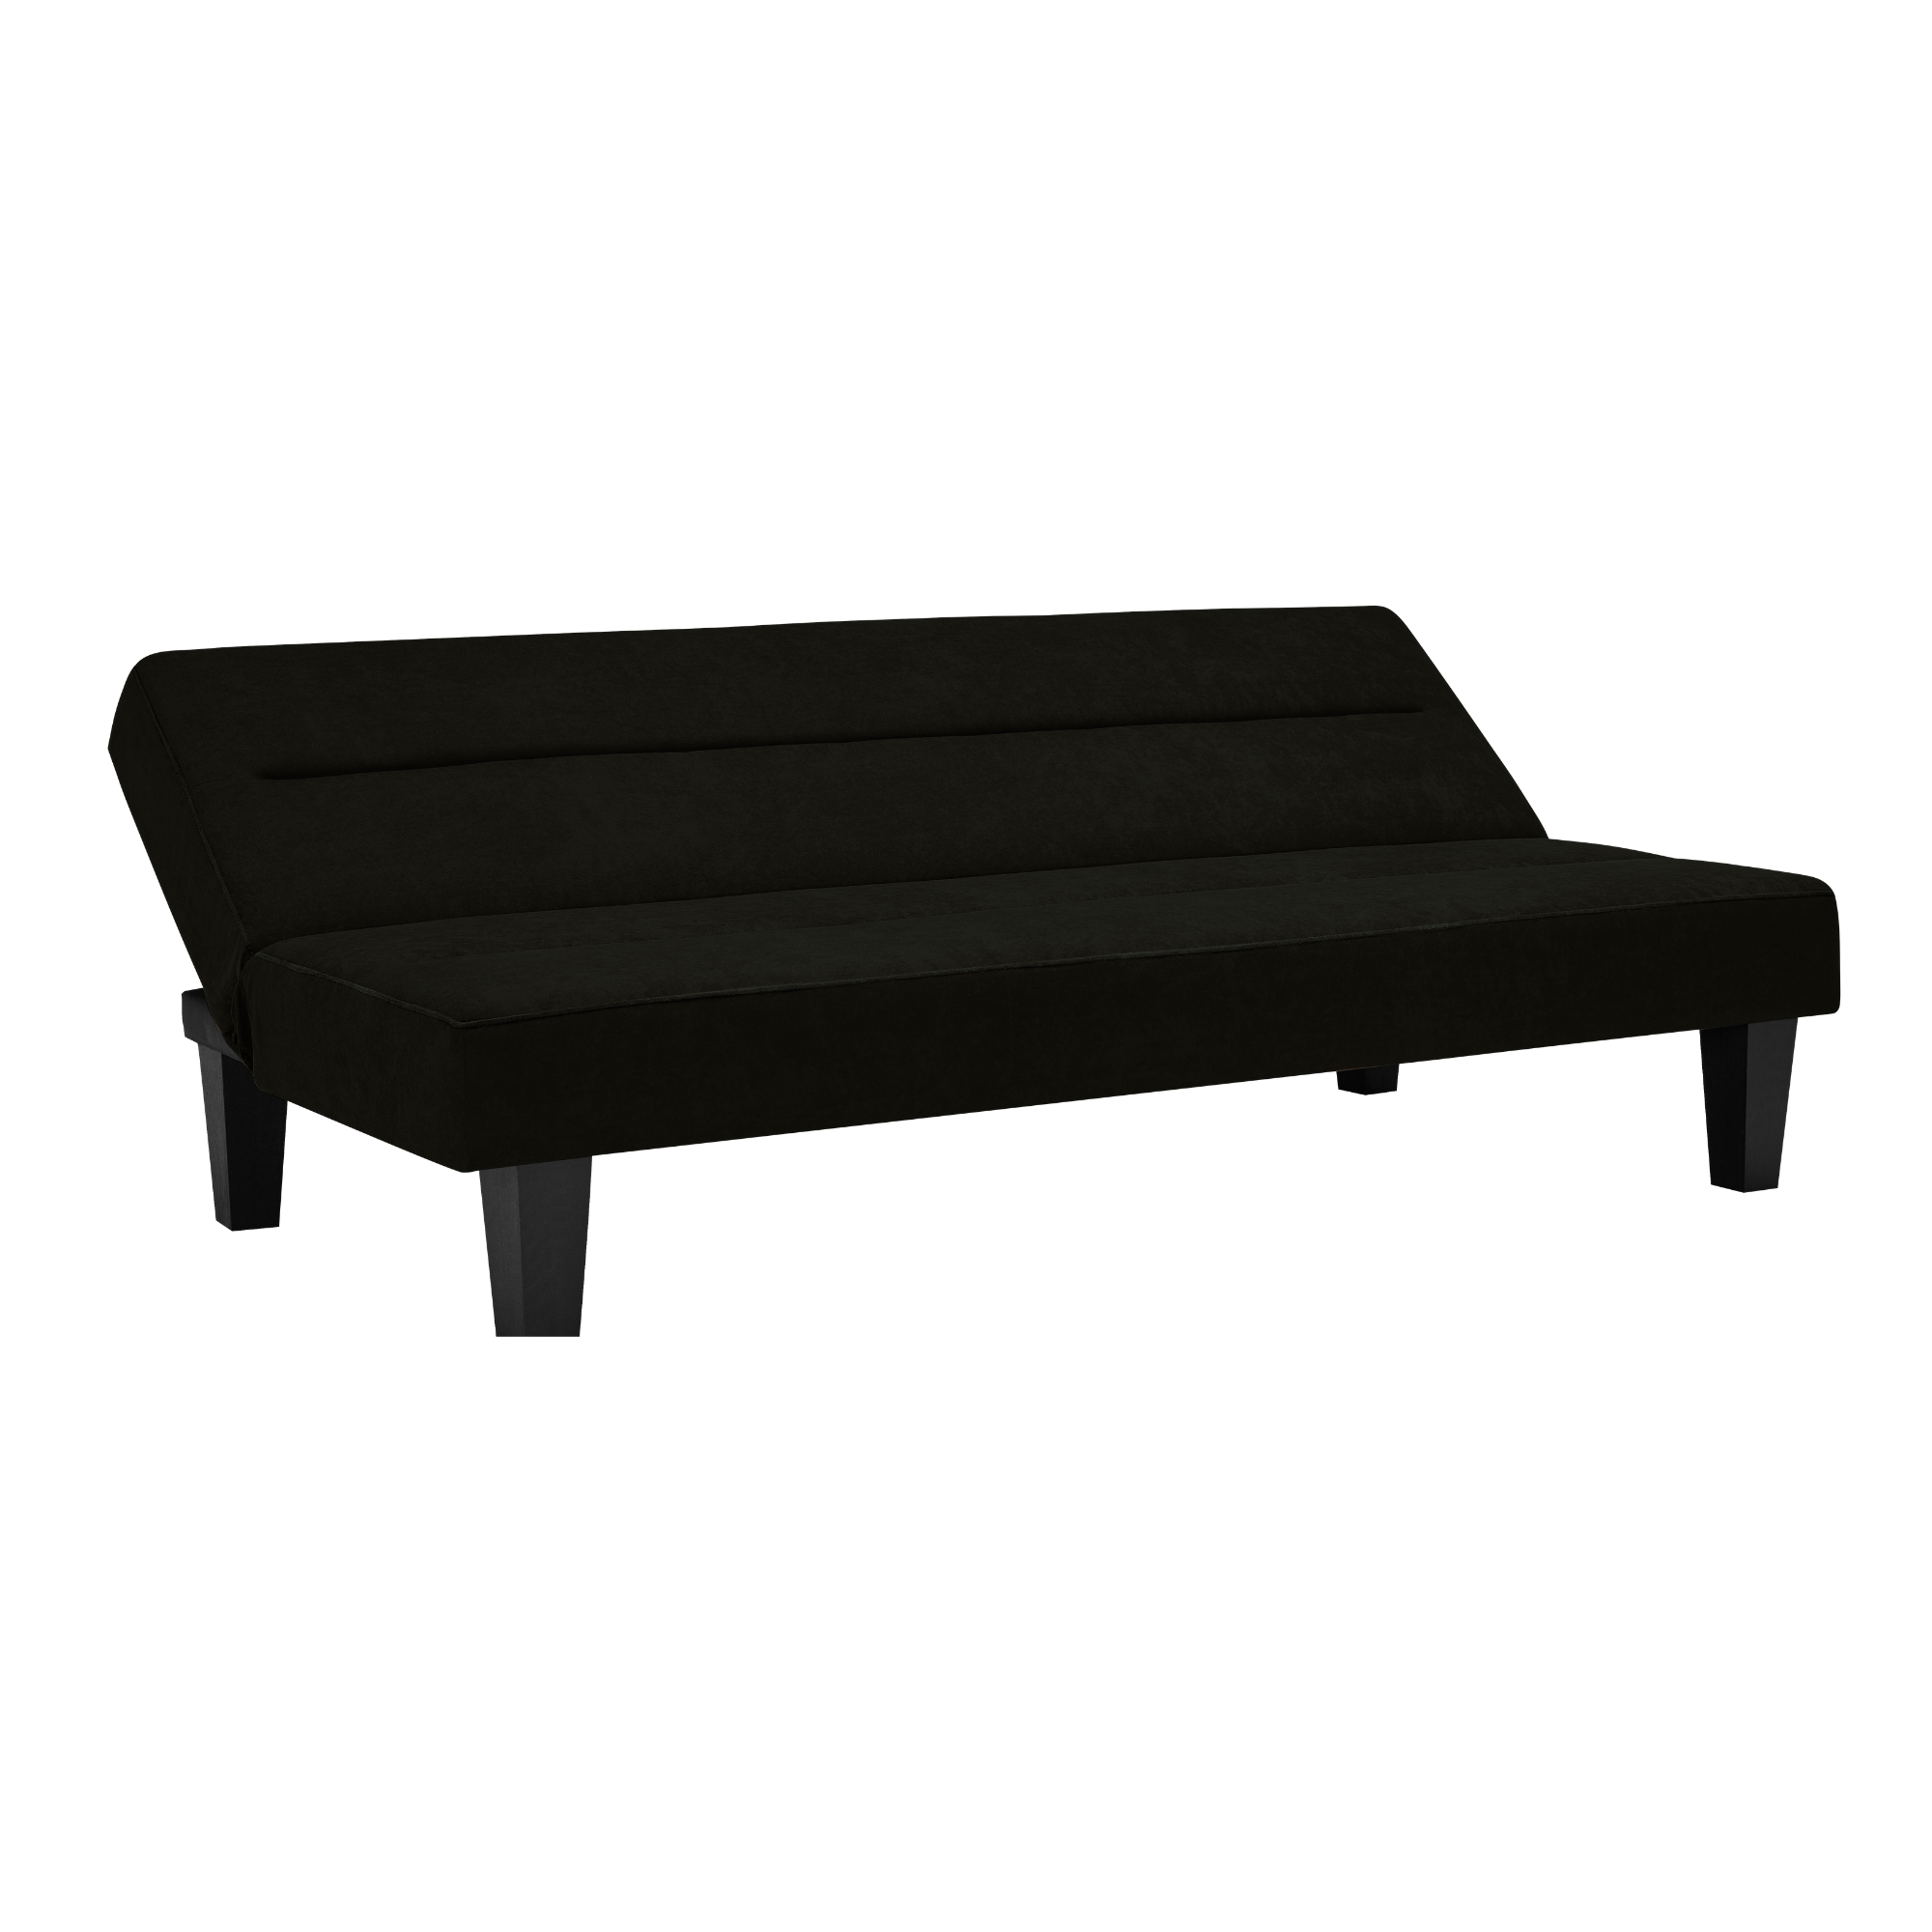 DHP Kebo Futon with Microfiber Cover, Black - image 5 of 15